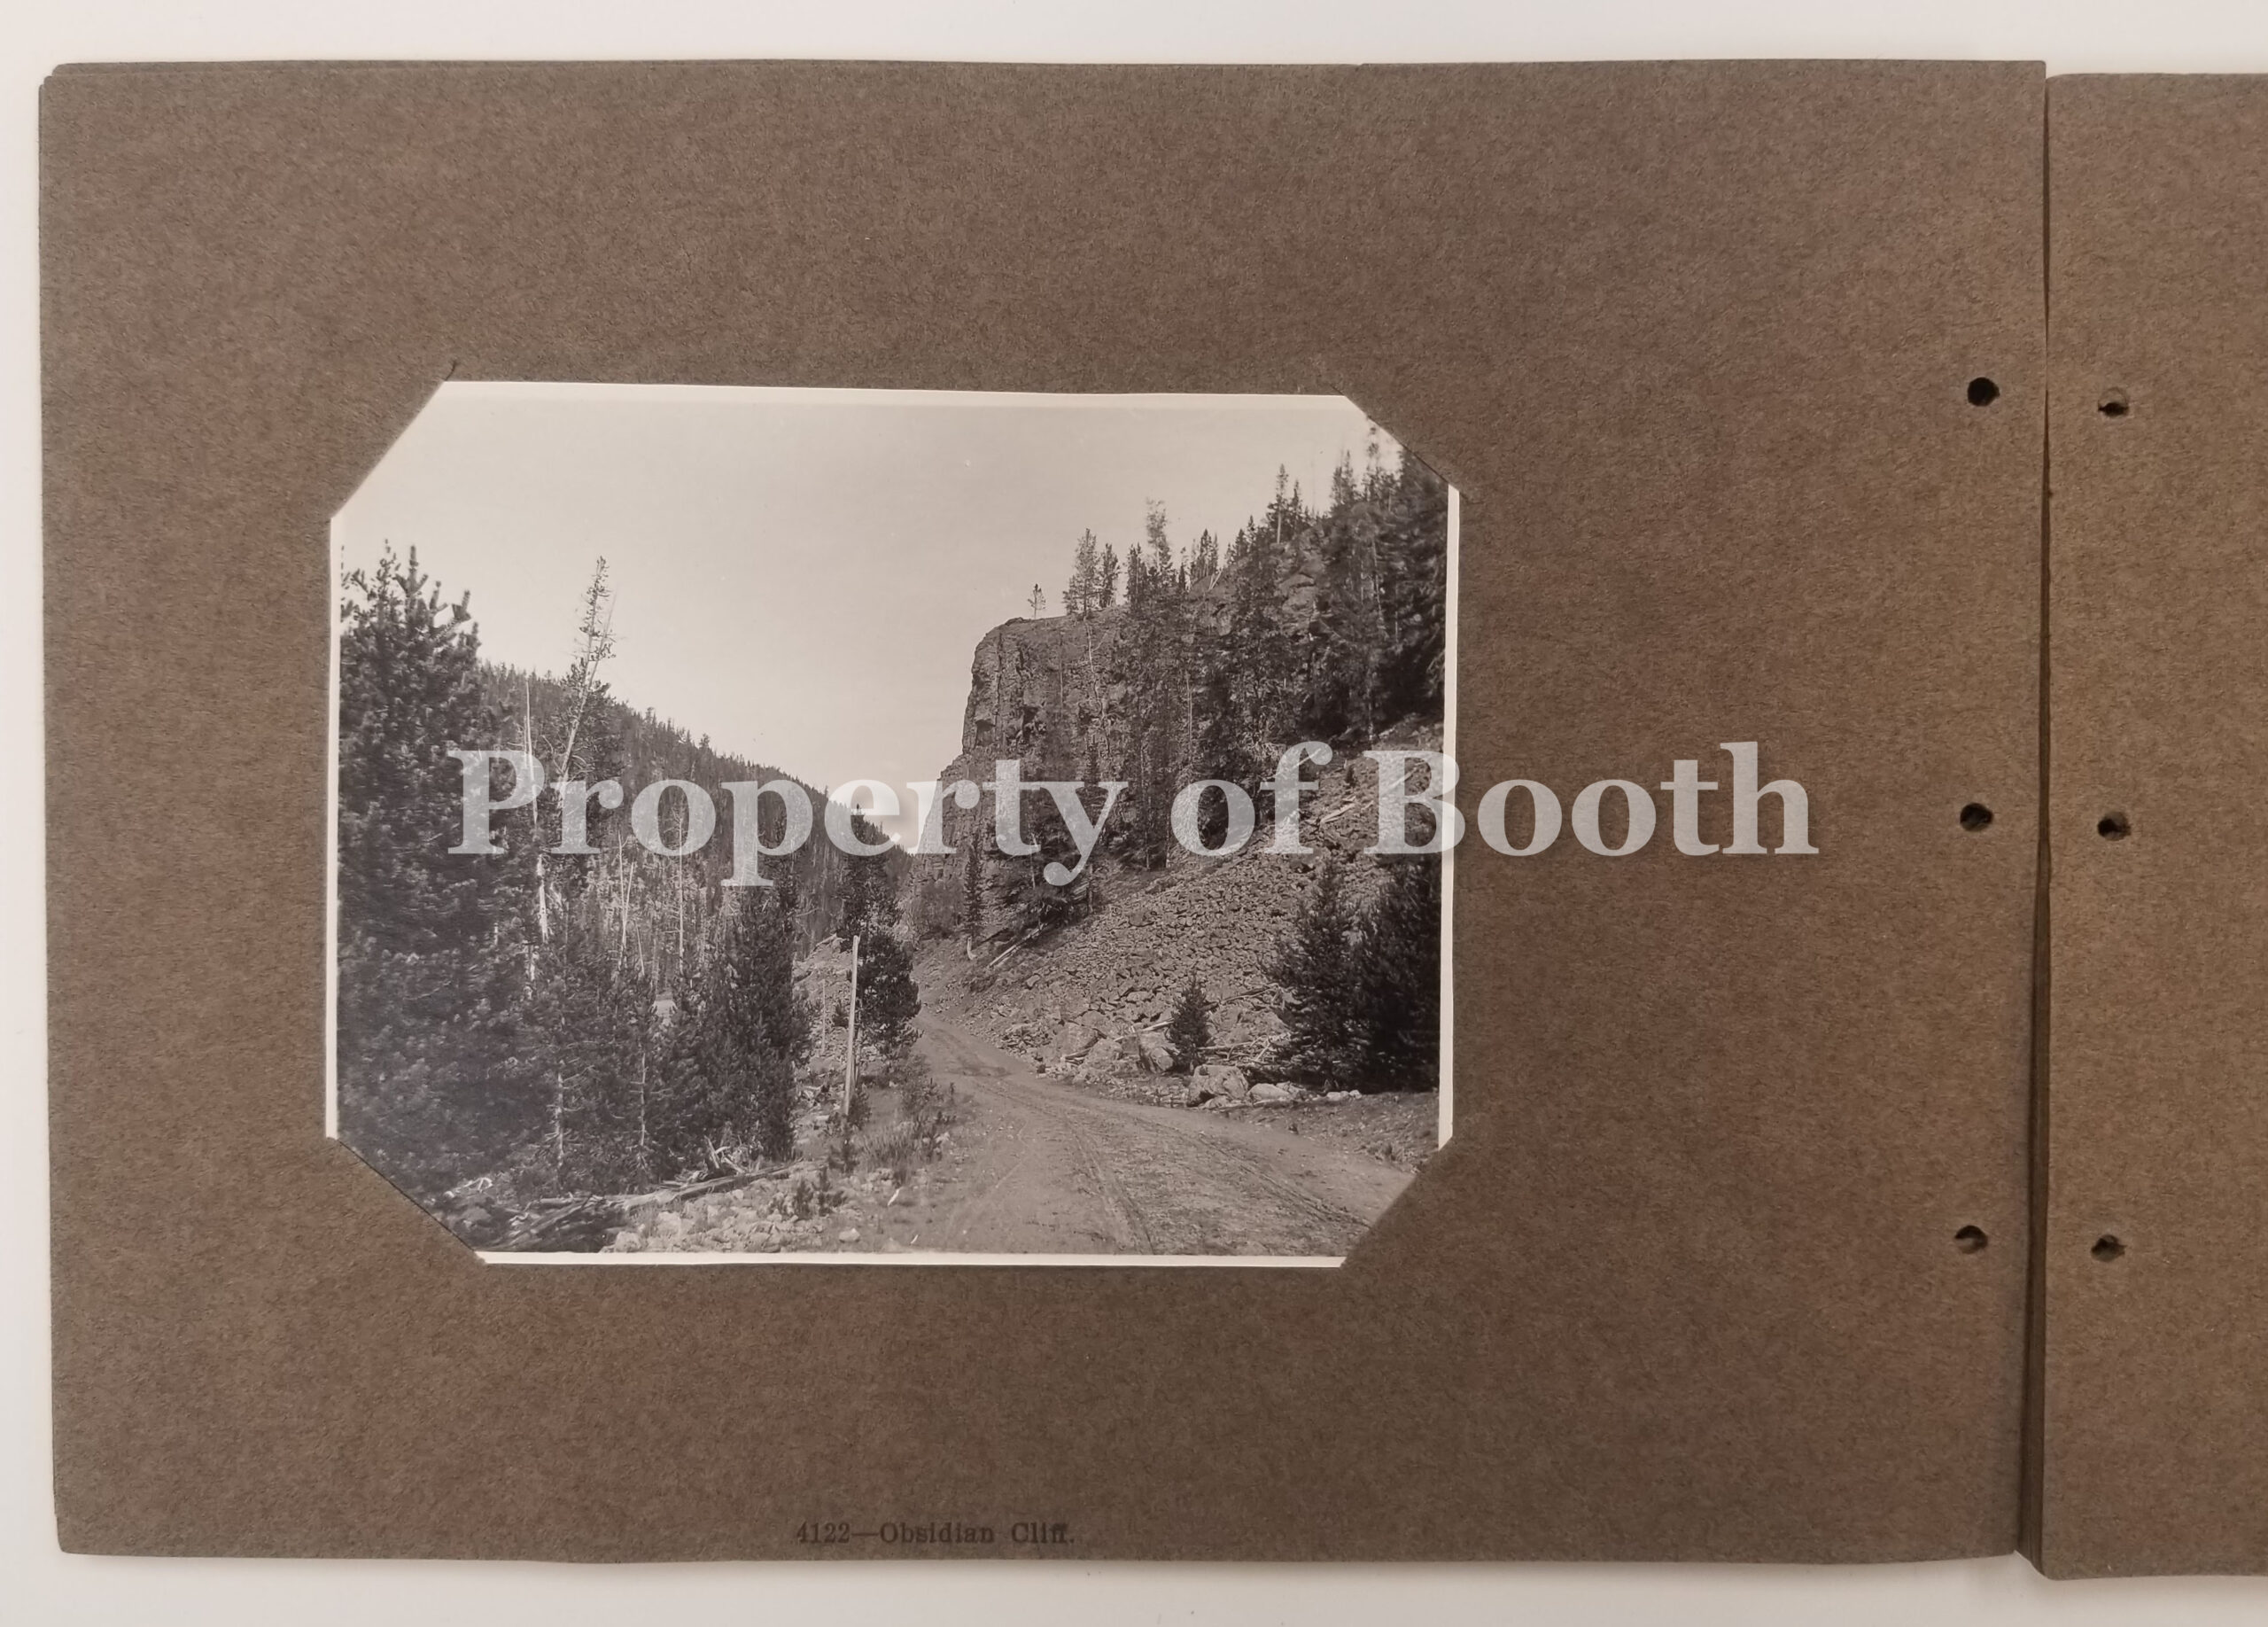 © Frank Jay Haynes, Yellowstone Park Album and Envelope, 1891, Paper, String, and Photo Prints, 6" x 8", PH2020.006.005a-b, Museum Purchase